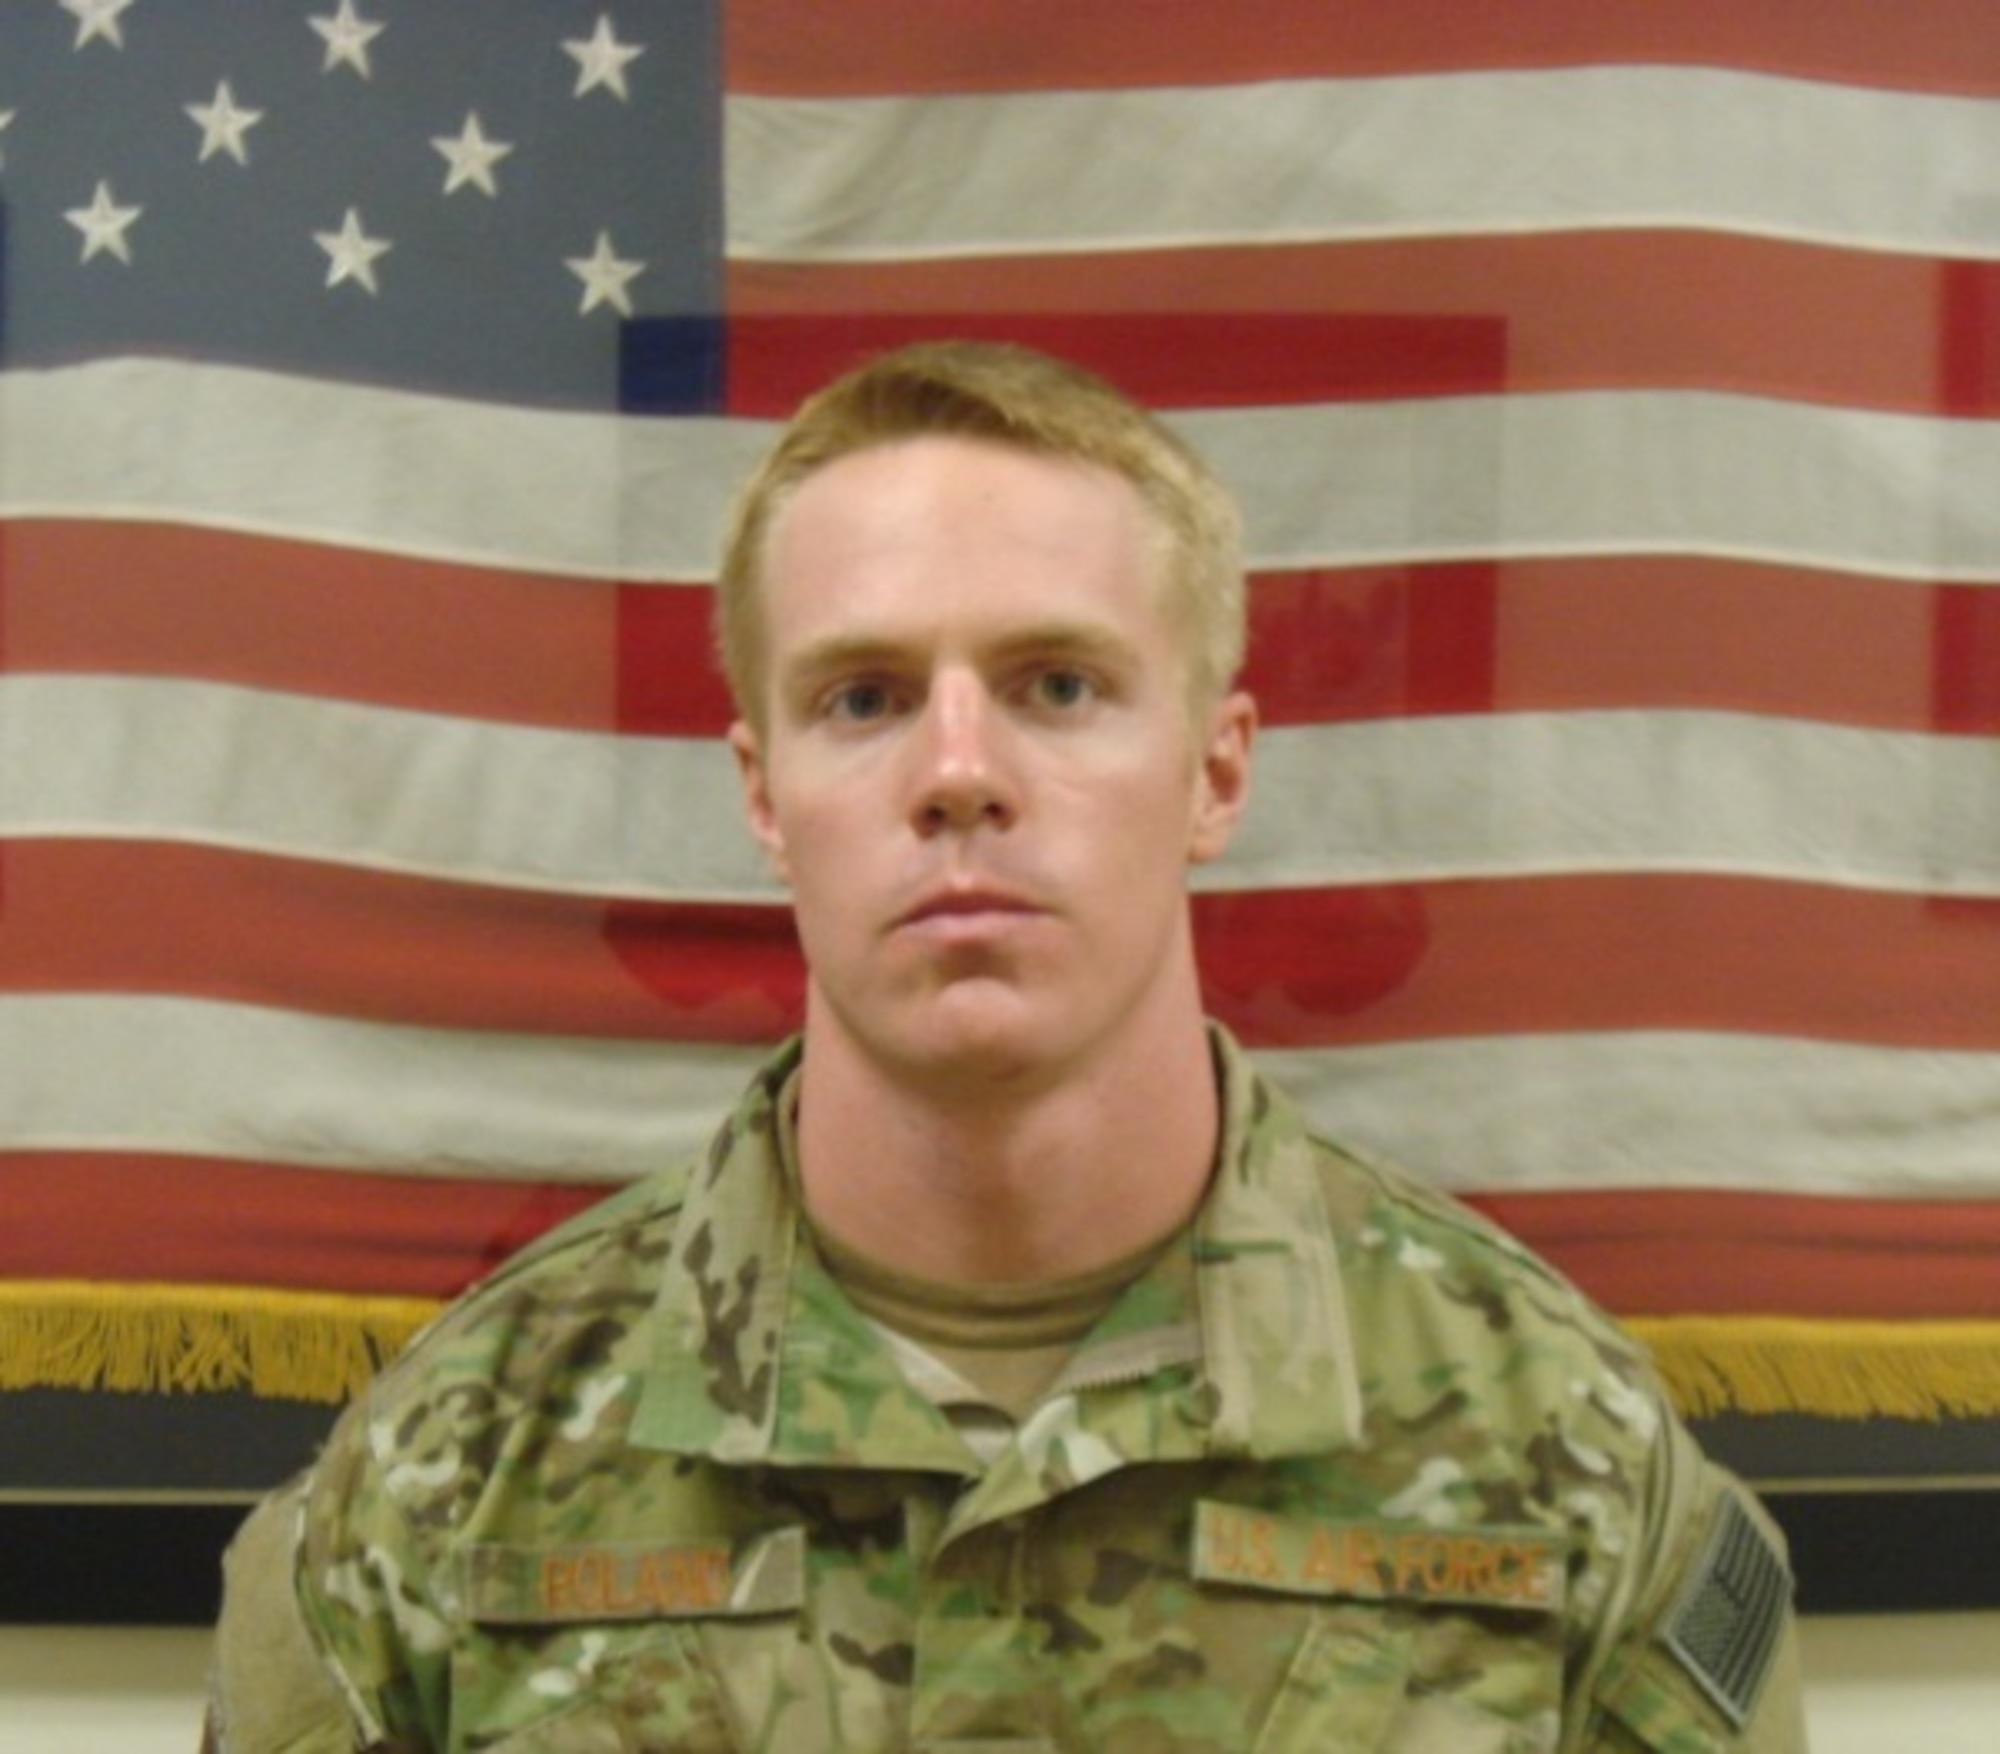 Capt. Matthew D. Roland, 27, was killed at a vehicle checkpoint near Camp Antonik, Afghanistan, Aug. 26, 2015. He was a special tactics officer at the 23rd Special Tactics Squadron, Hurlburt Field, Fla. He was deployed in support of Operation Freedom’s Sentinel. (Courtesy photo)
